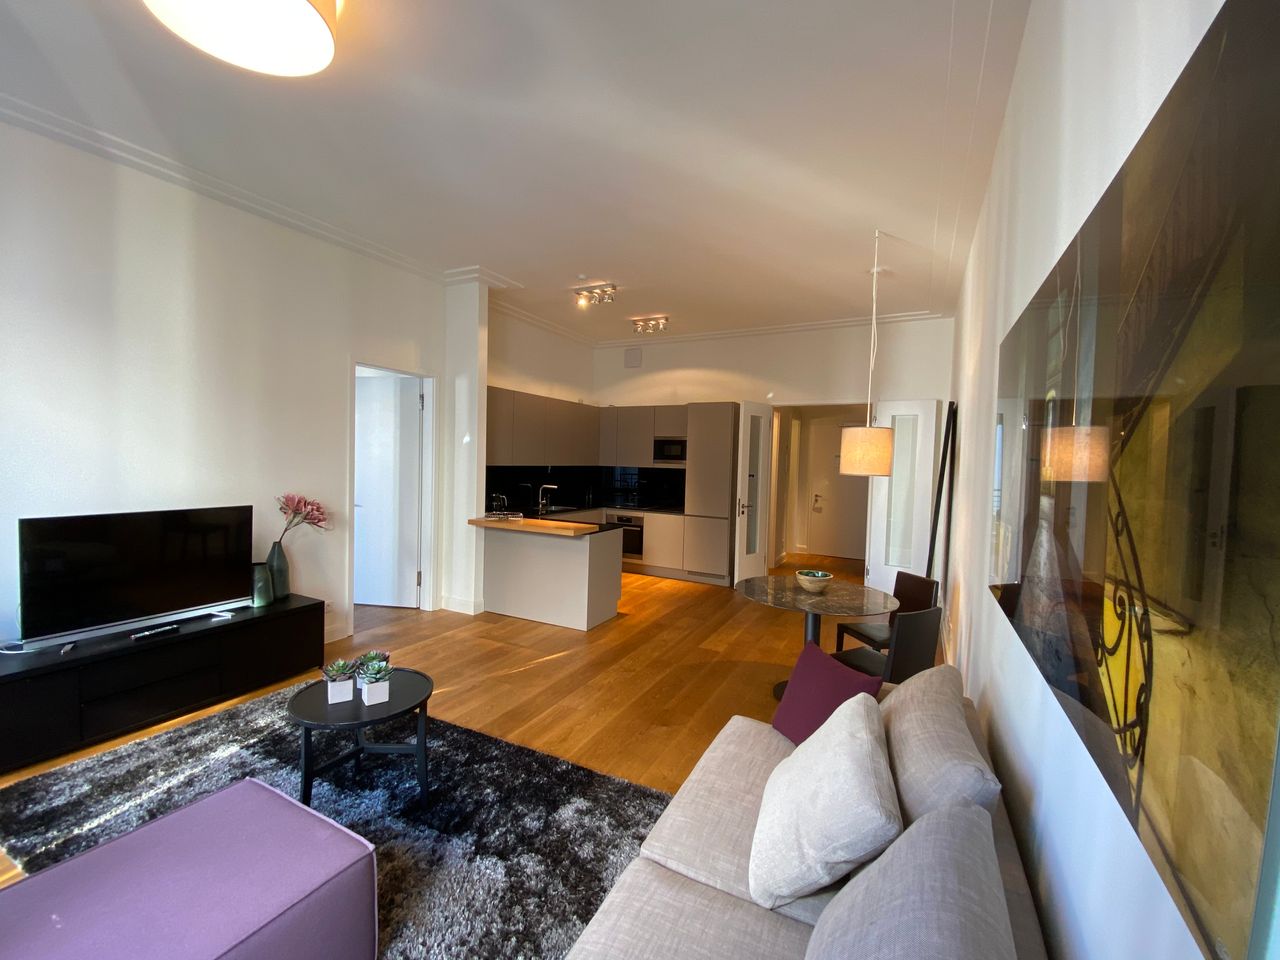 Premium apartment with new and high quality equipment in the heart of Düsseldorf